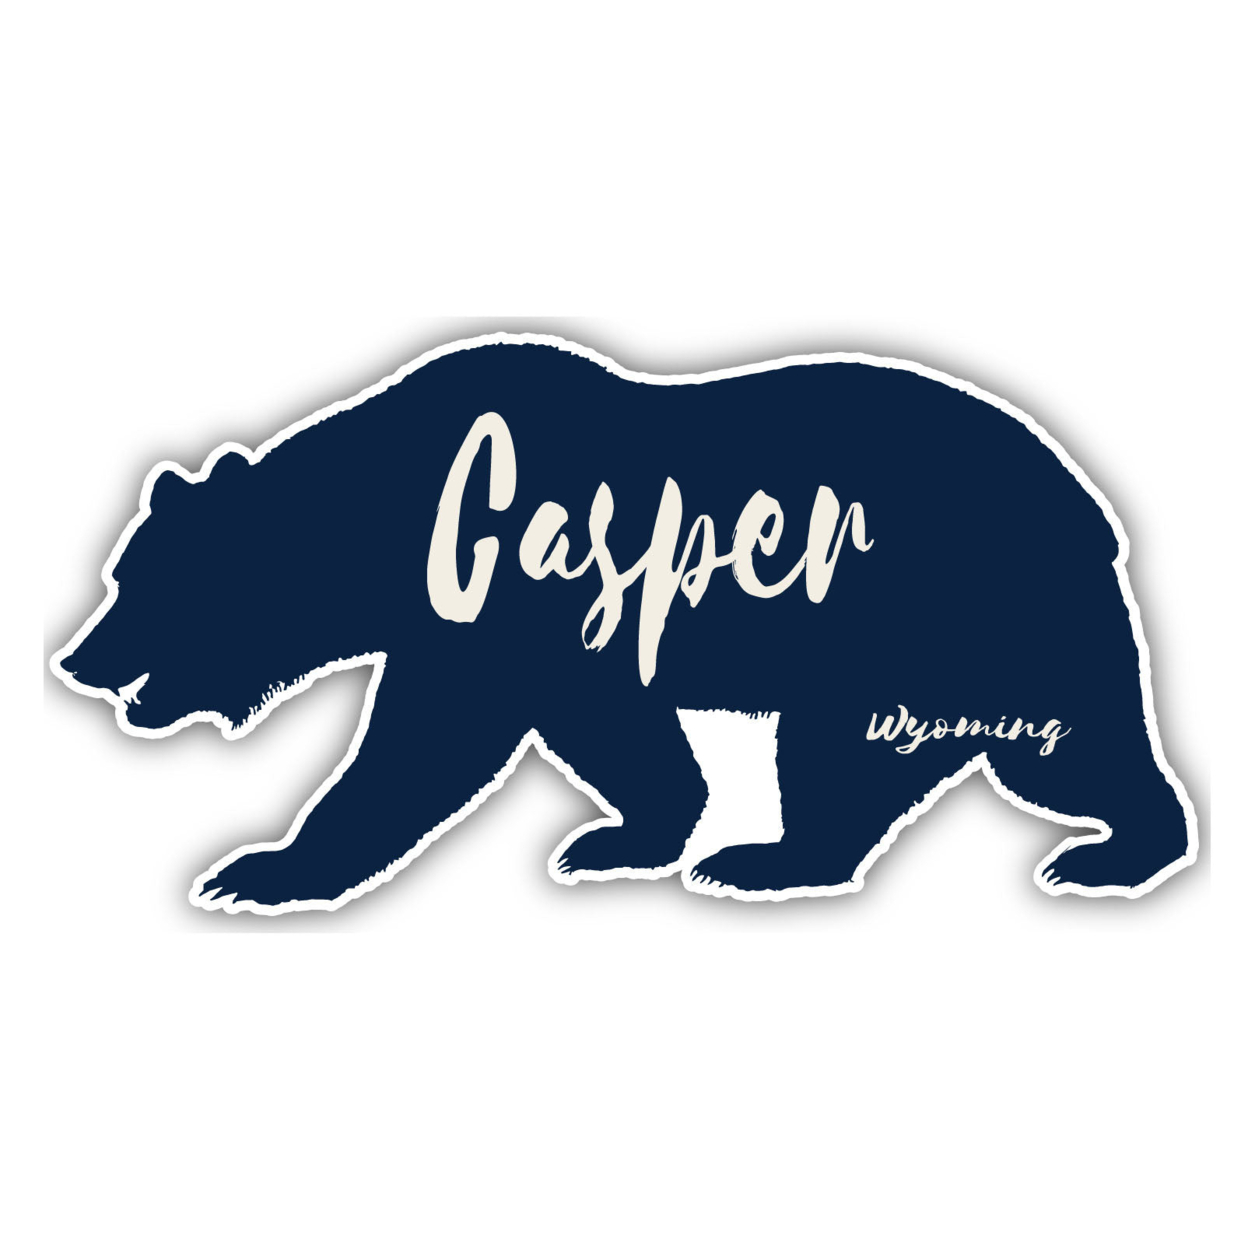 Casper Wyoming Souvenir Decorative Stickers (Choose Theme And Size) - 4-Pack, 12-Inch, Camp Life